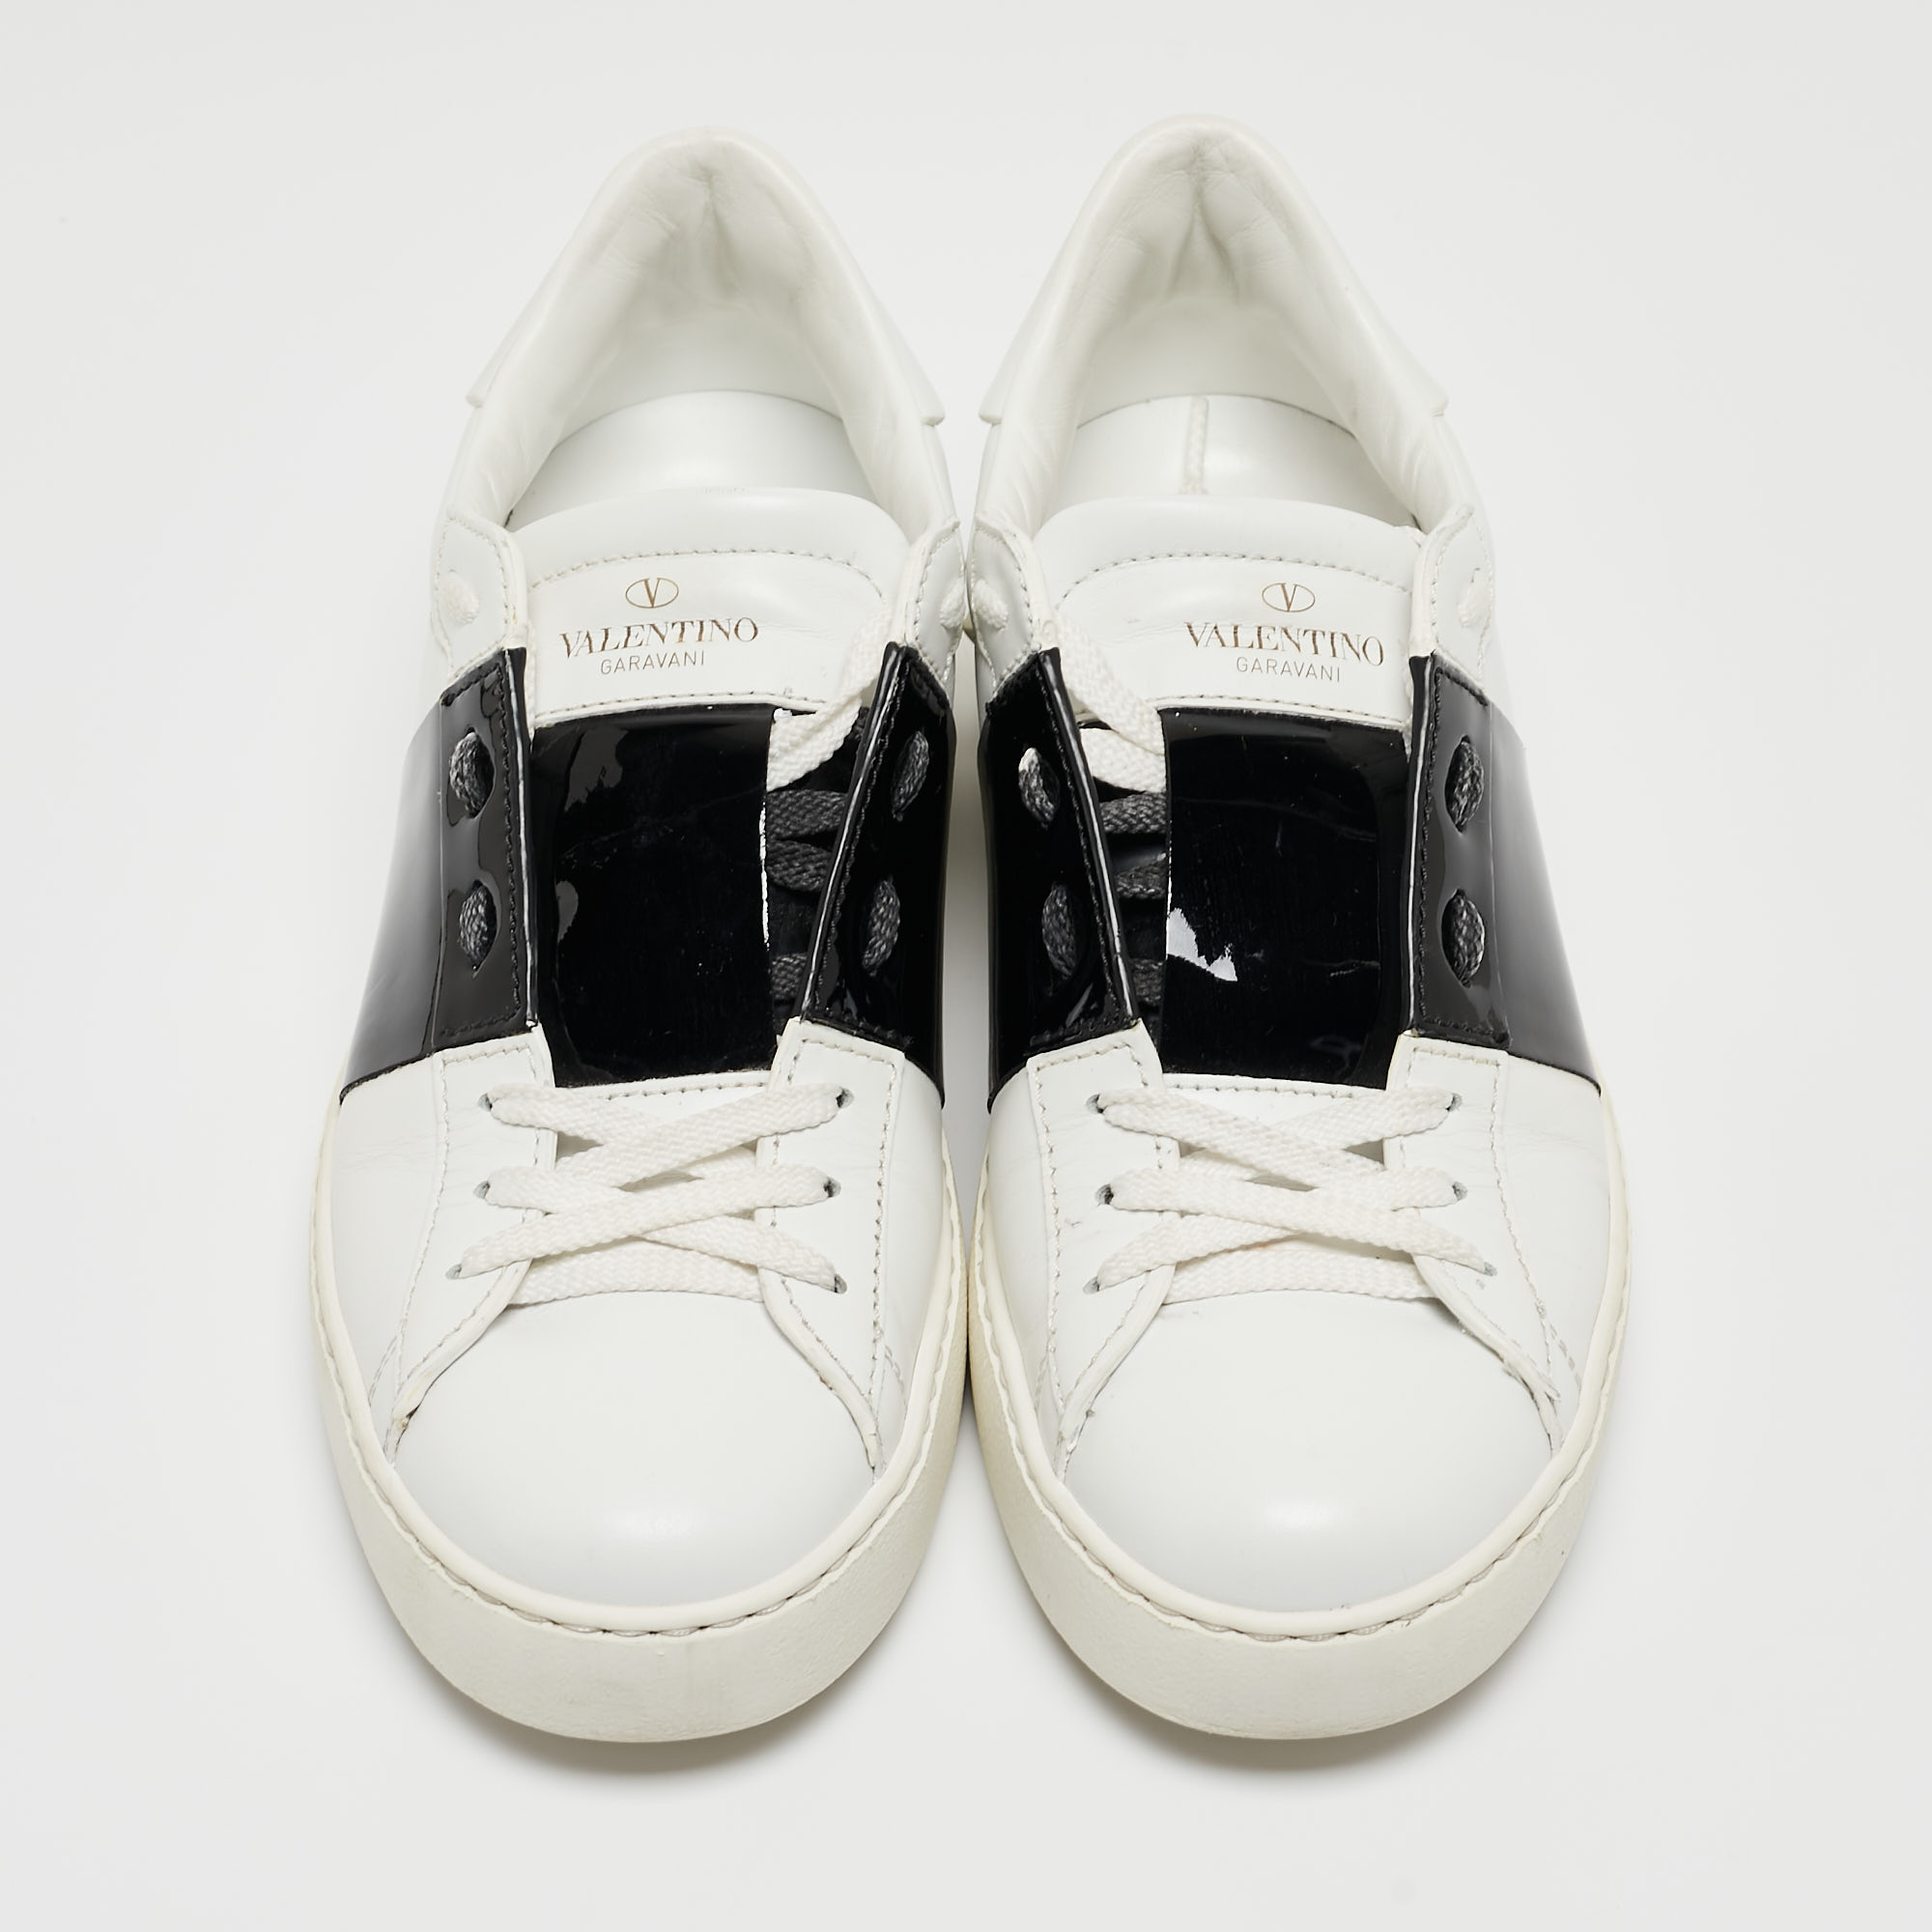 Valentino White/Black Leather Rockstud Low Top Sneakers Size 38